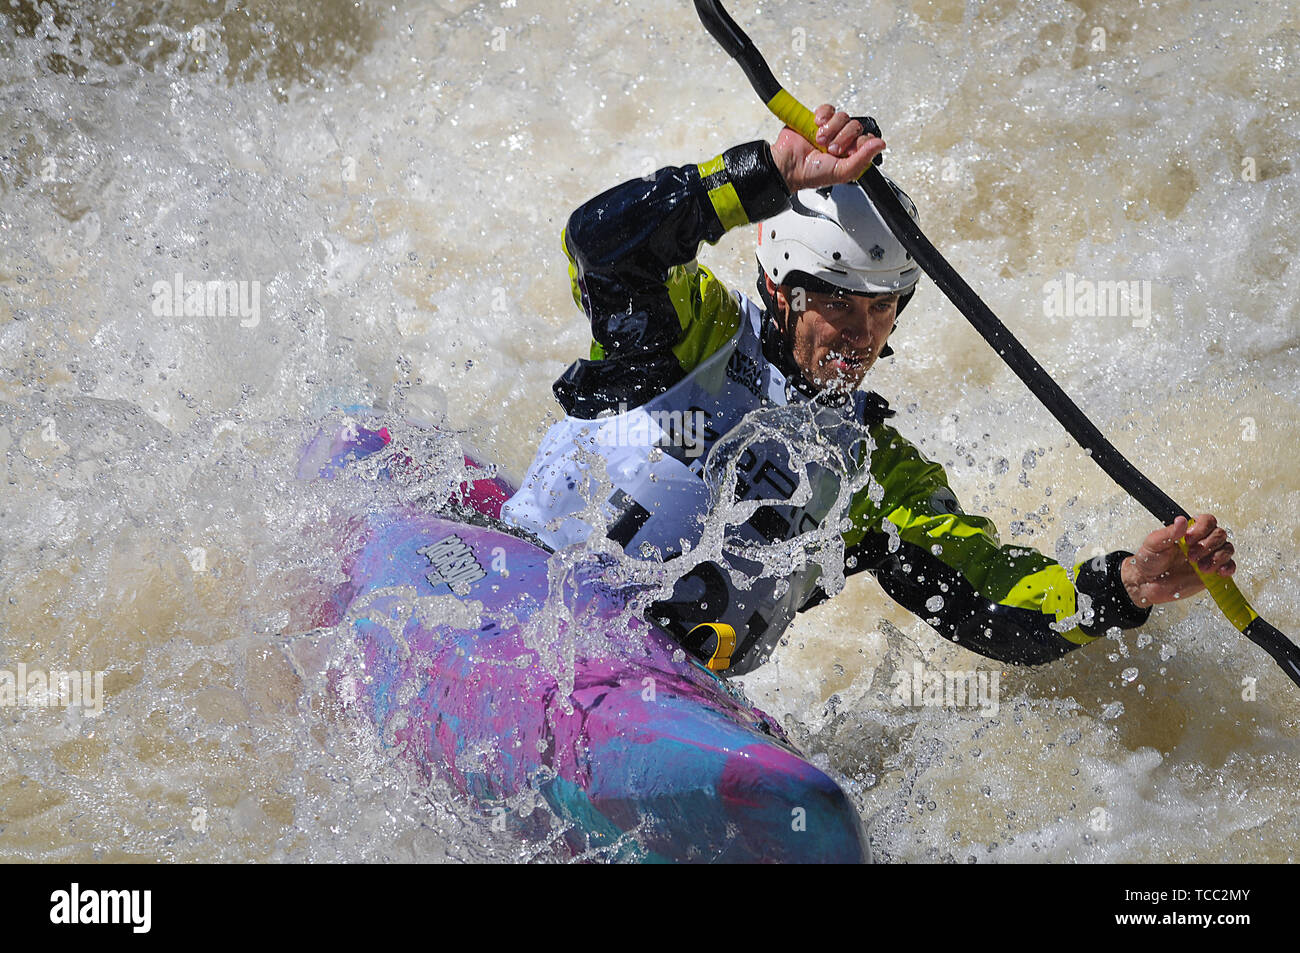 Vail, Colorado, USA. June 6, 2019: The Class 5 whitewater of Homestake Creek requires every paddler's full attention during the GoPro Mountain Games. Adventure athletes from around the world gather in Vail, Colorado each summer for North America's largest celebration of adventure sports competition, art, and music. Vail, Colorado. Credit: Cal Sport Media/Alamy Live News Stock Photo